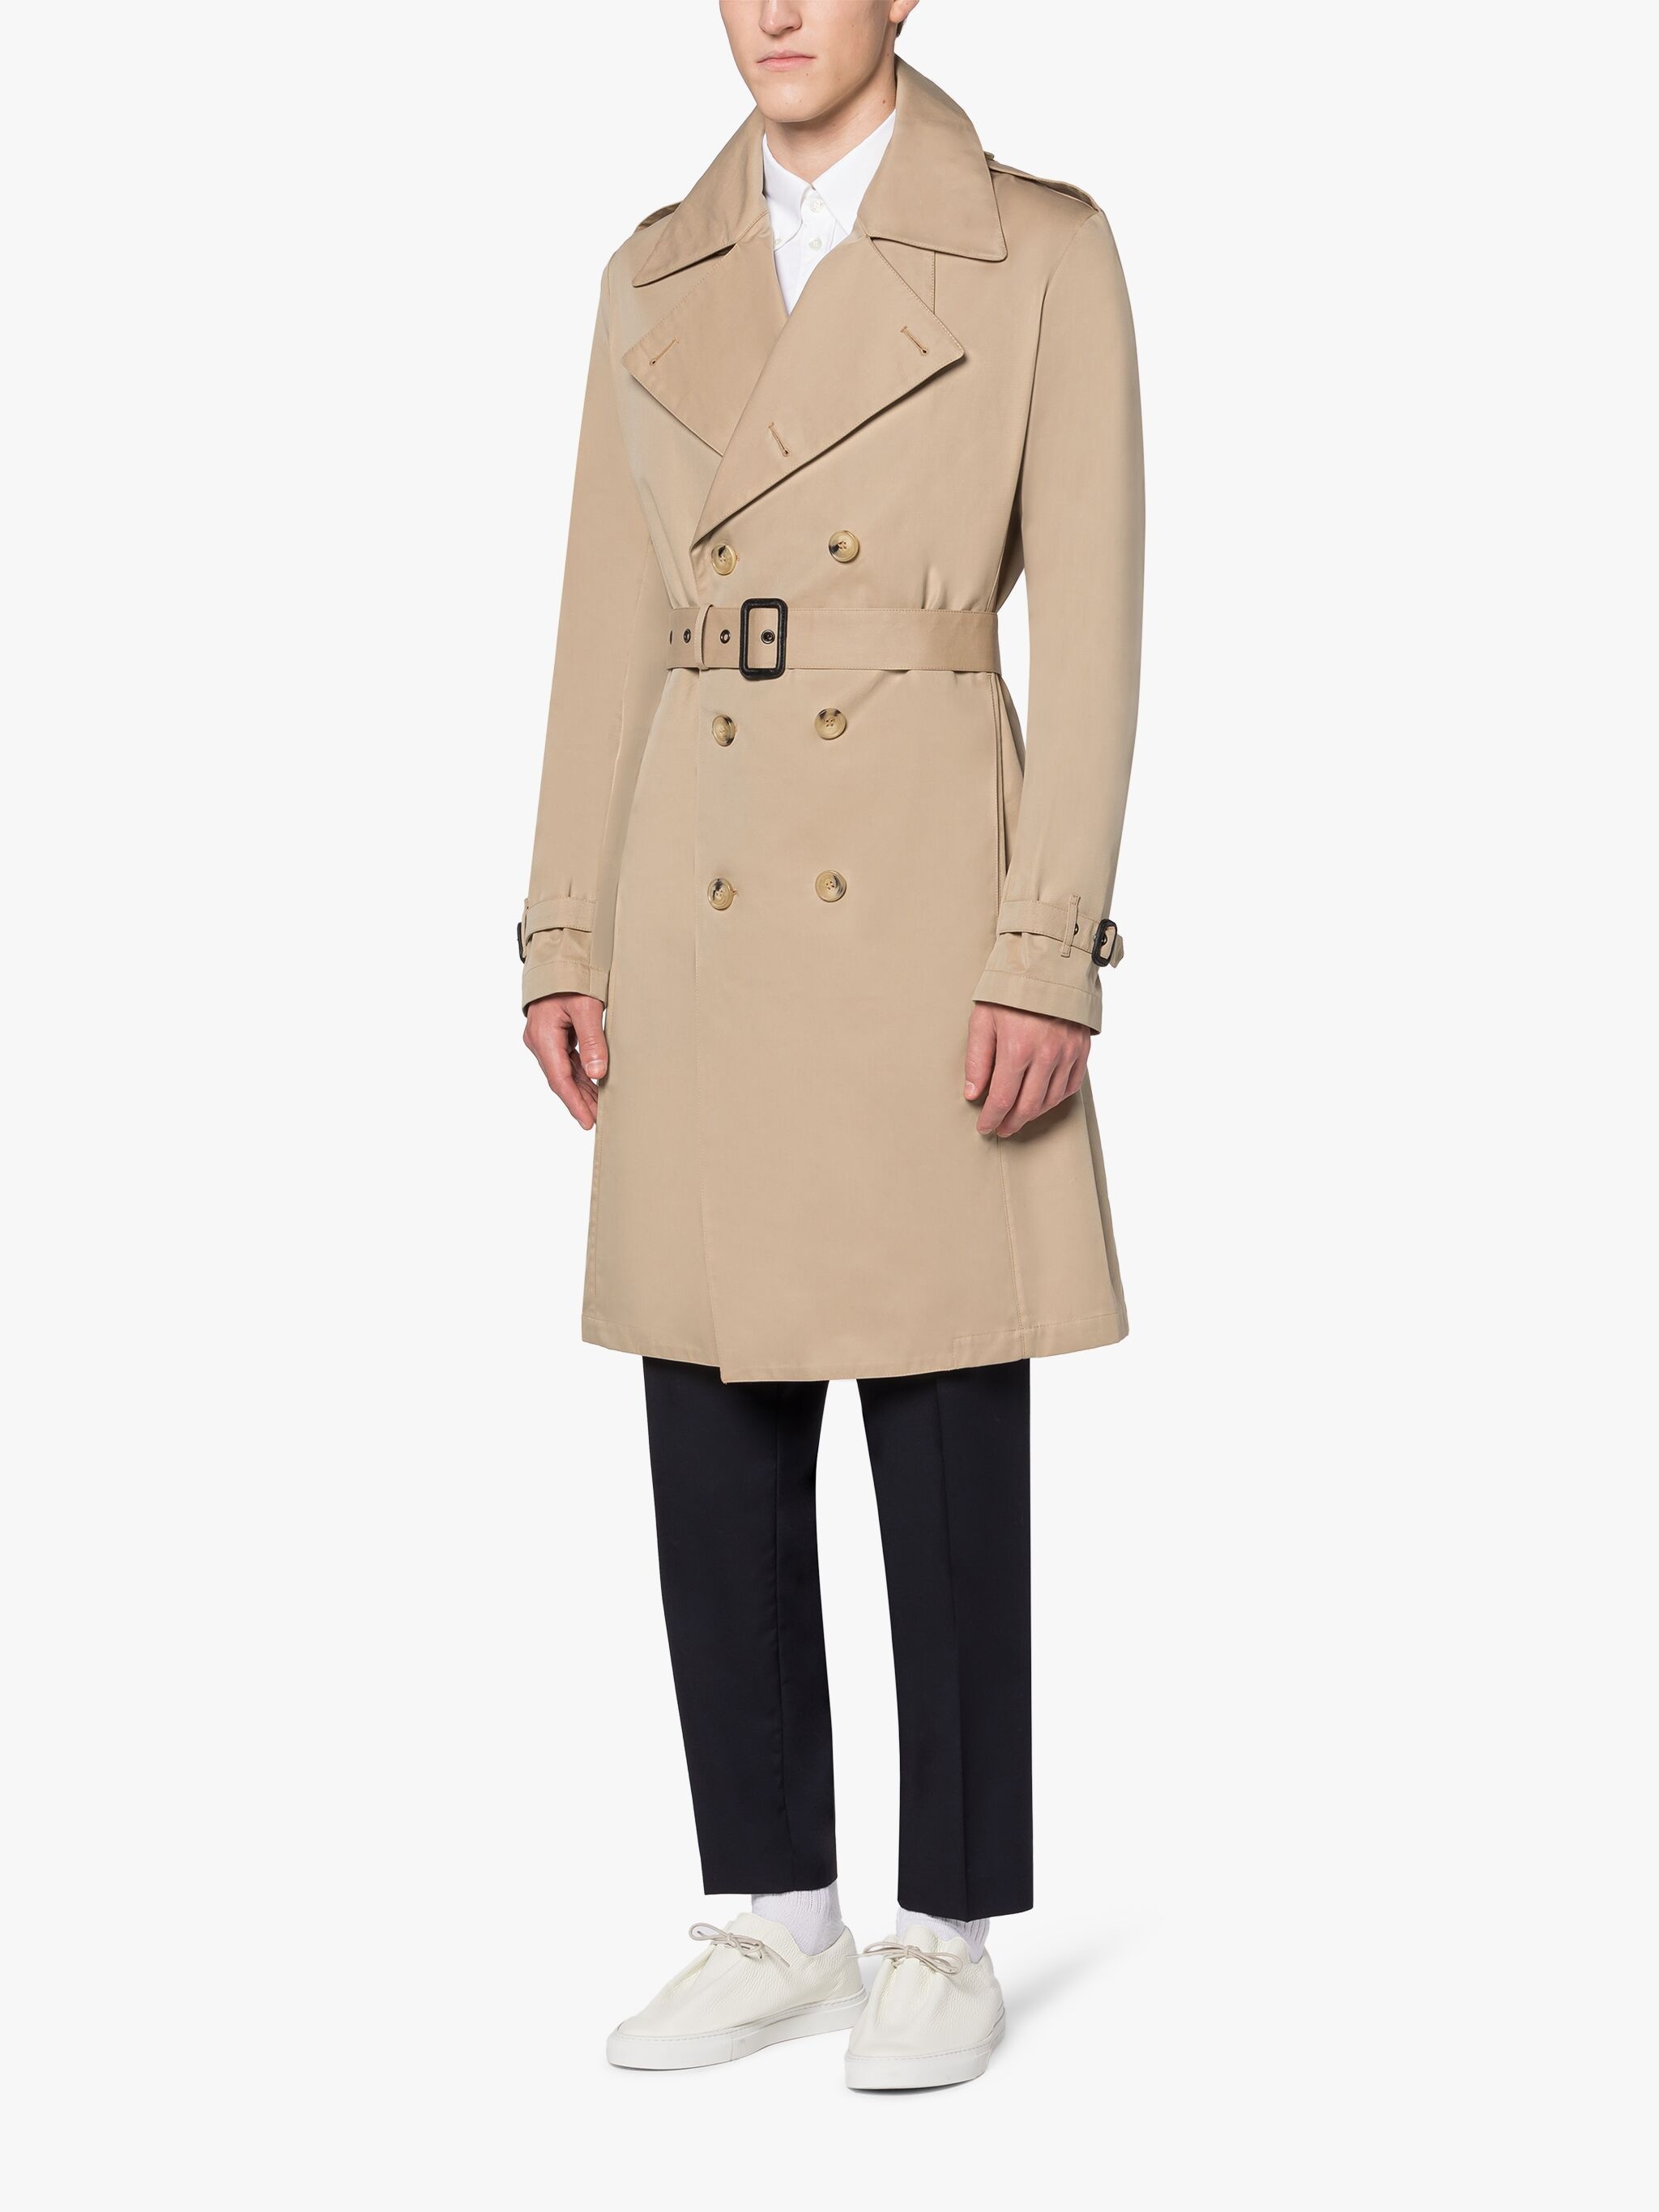 ST ANDREWS SAND COTTON TRENCH COAT - 4